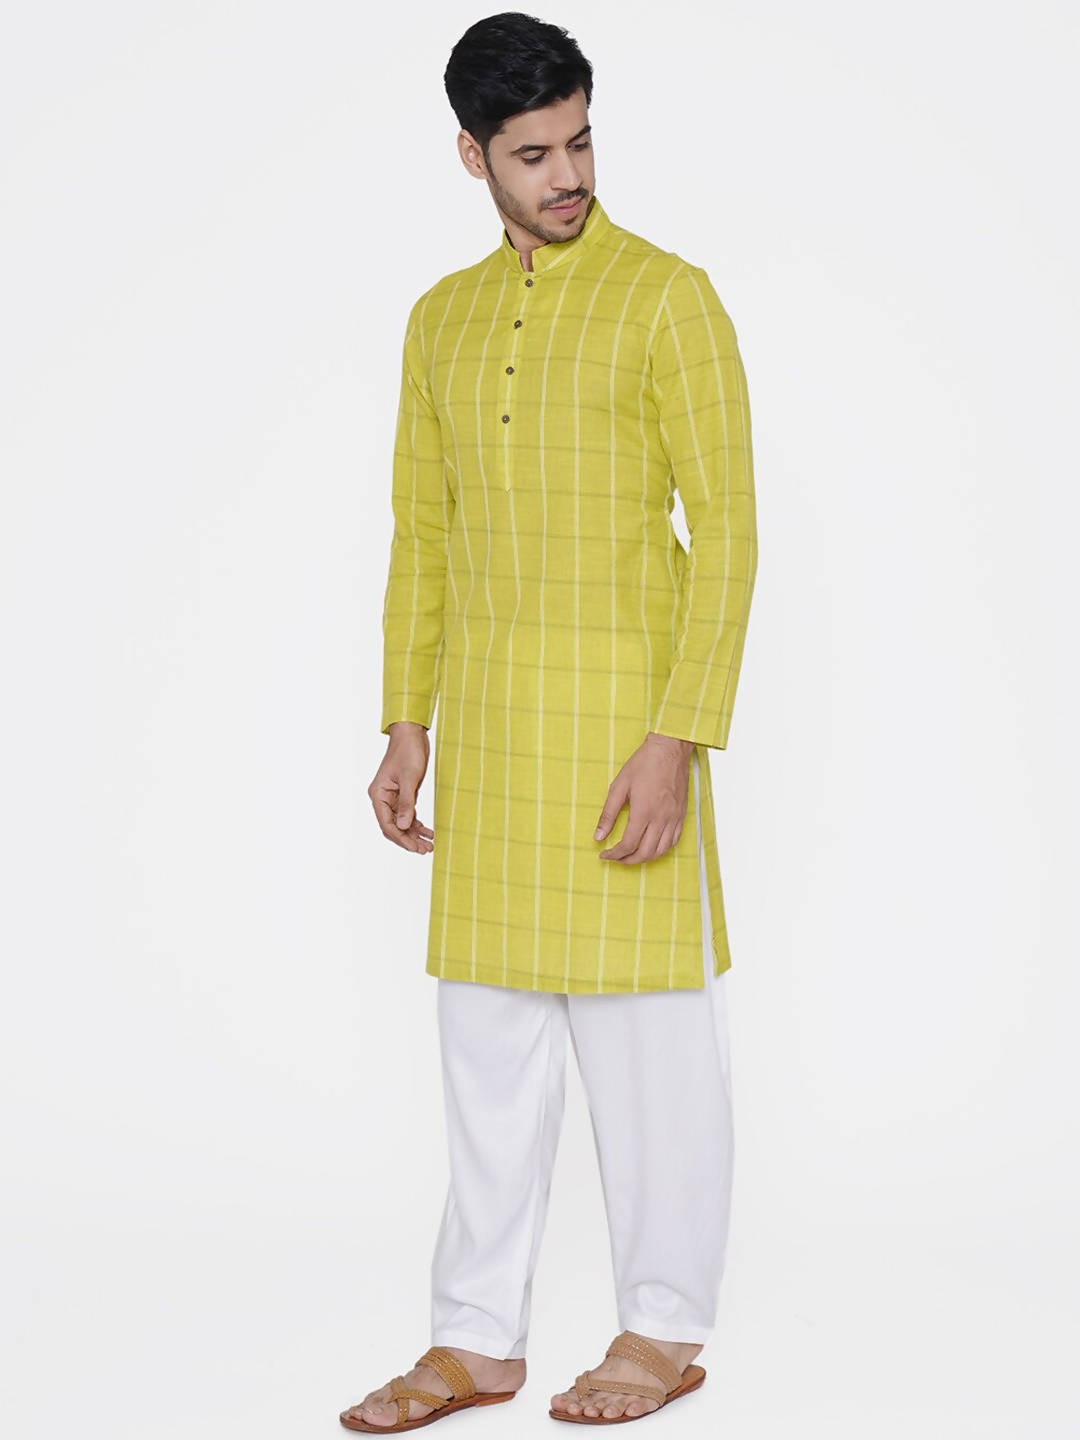 Menswear Brands In India For Latest Wedding Collection!